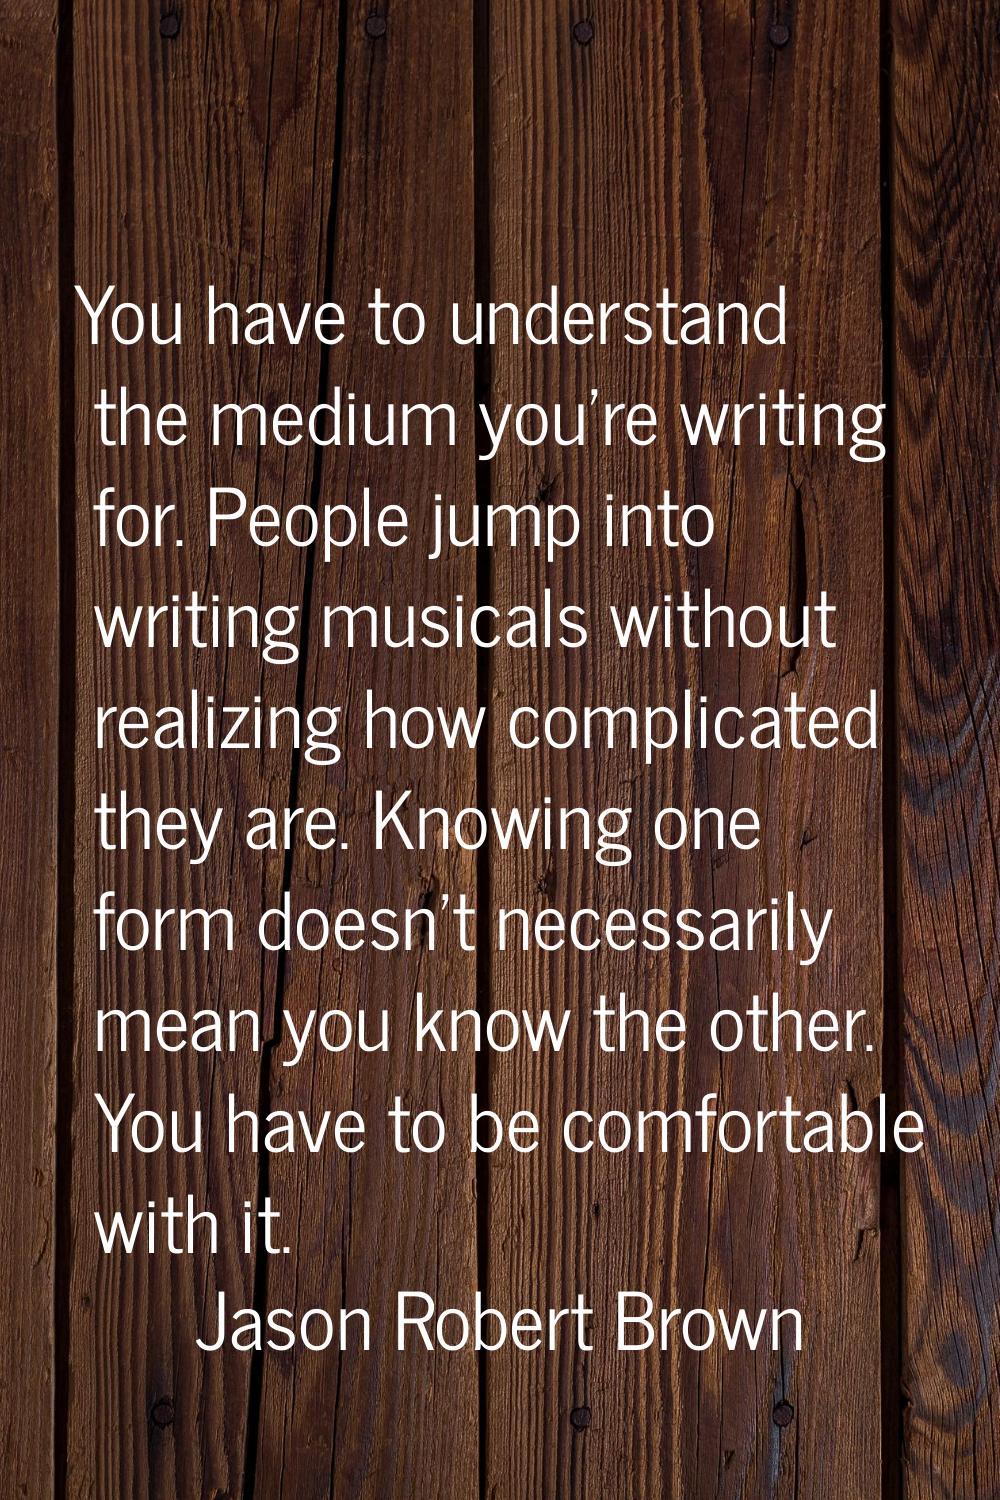 You have to understand the medium you're writing for. People jump into writing musicals without rea